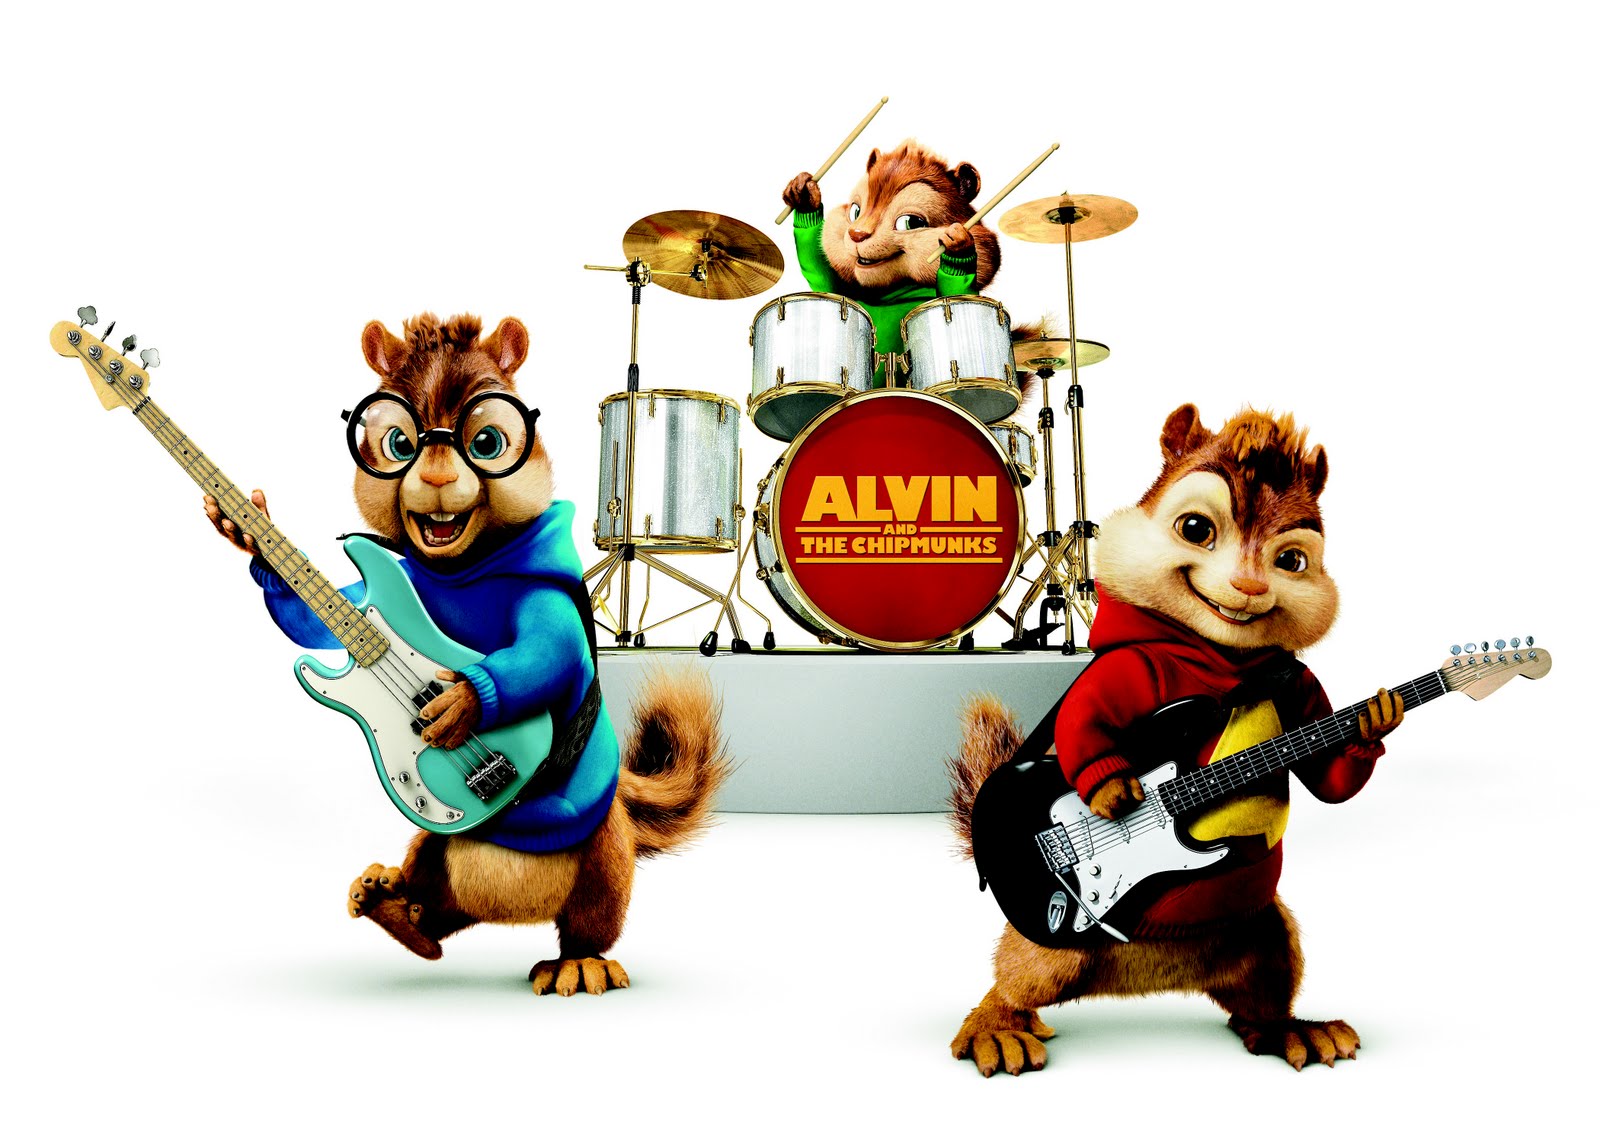 Alvin And The Chipmunks Image# 2.